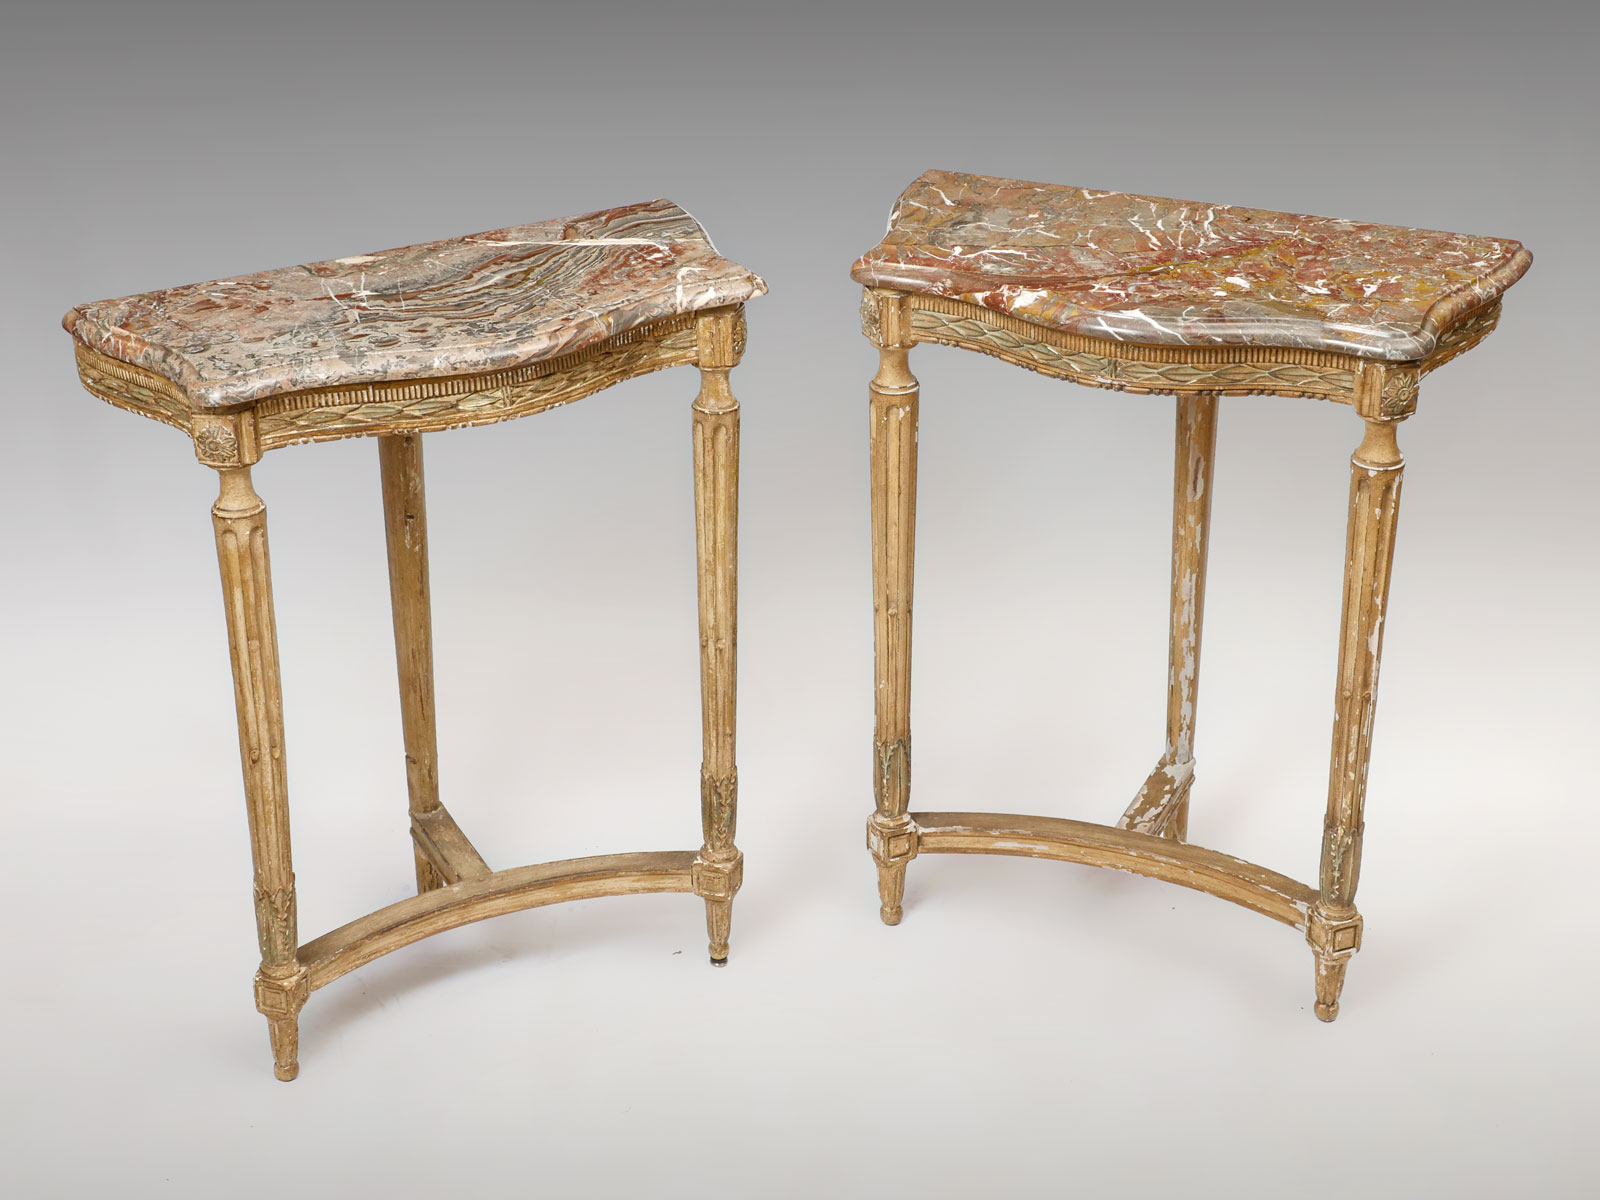 PAIR OF CARVED & GILDED MARBLE